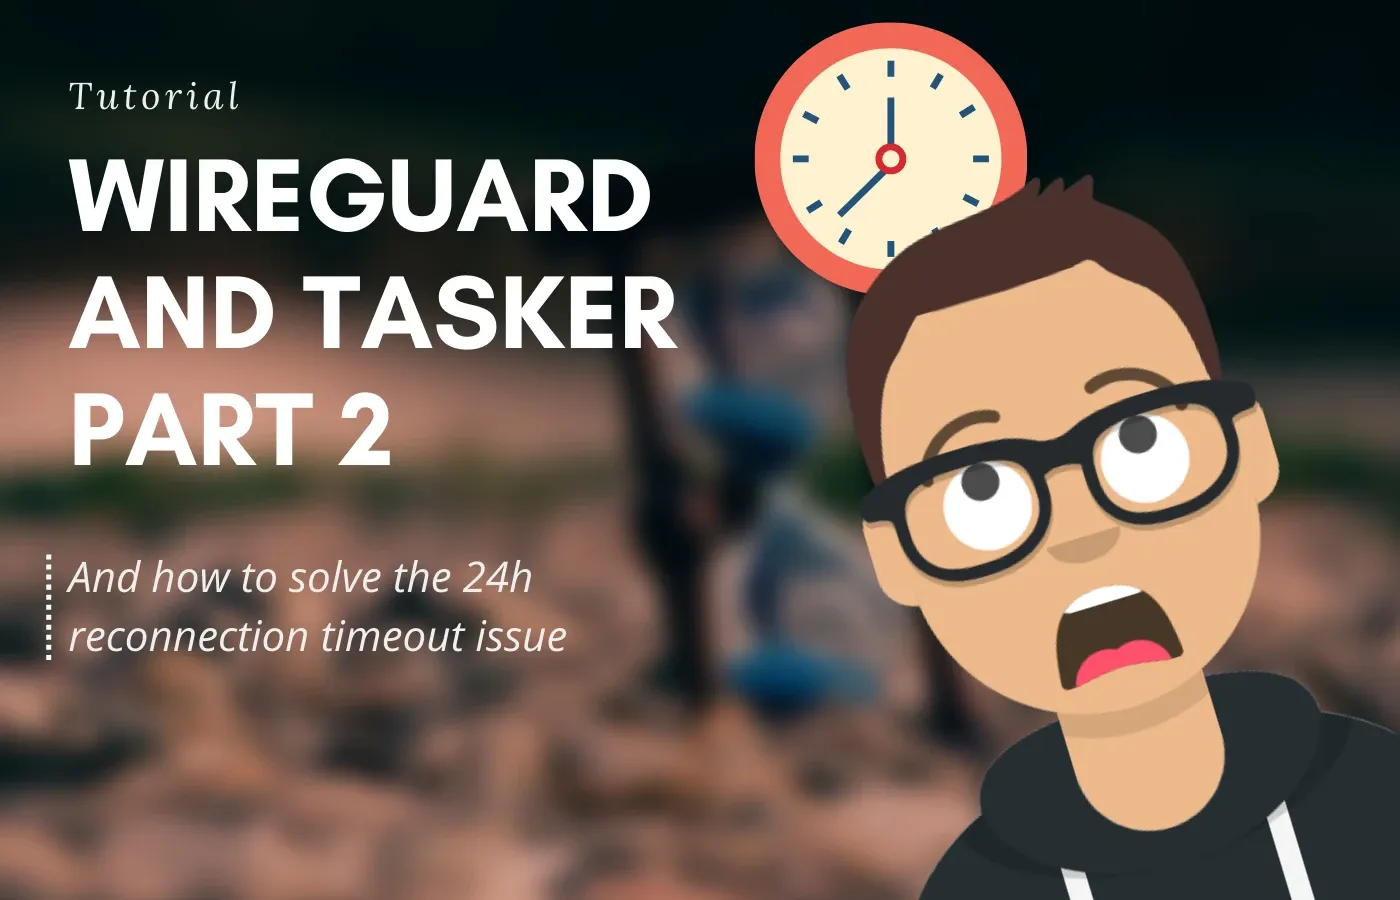 Wireguard and Tasker Part 2: The 24h reconnection timeout problem